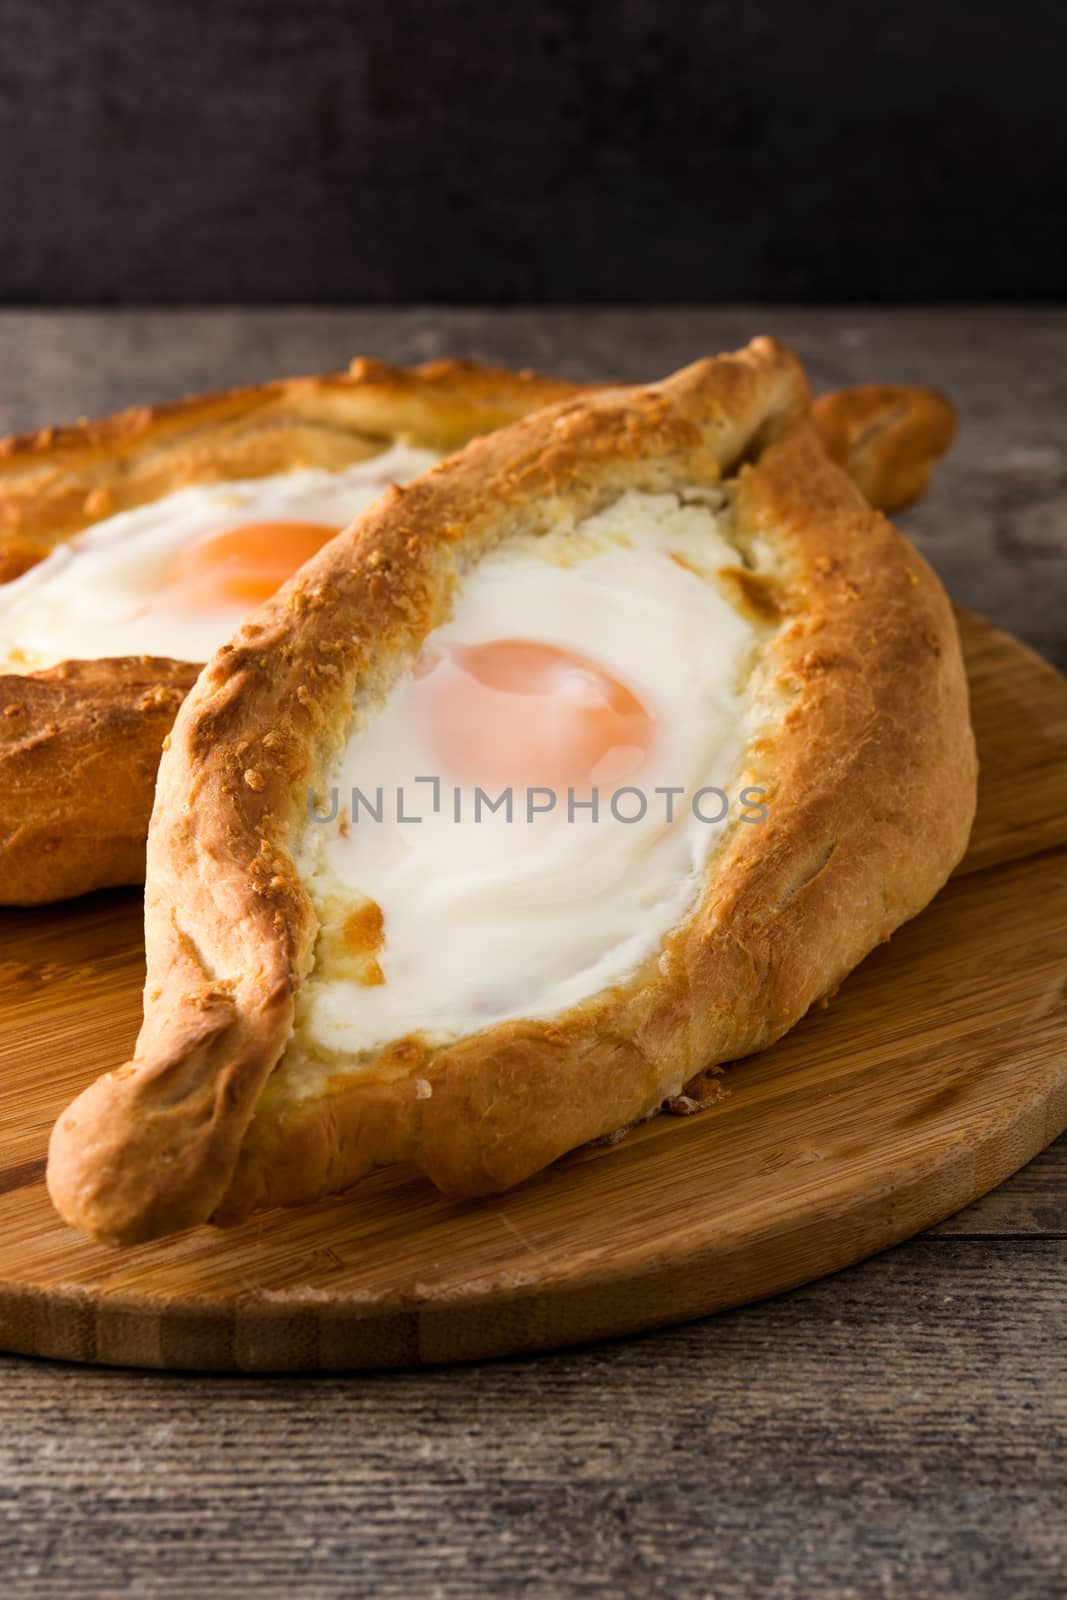 Traditional Adjarian Georgian khachapuri with cheese and egg on wooden table by chandlervid85